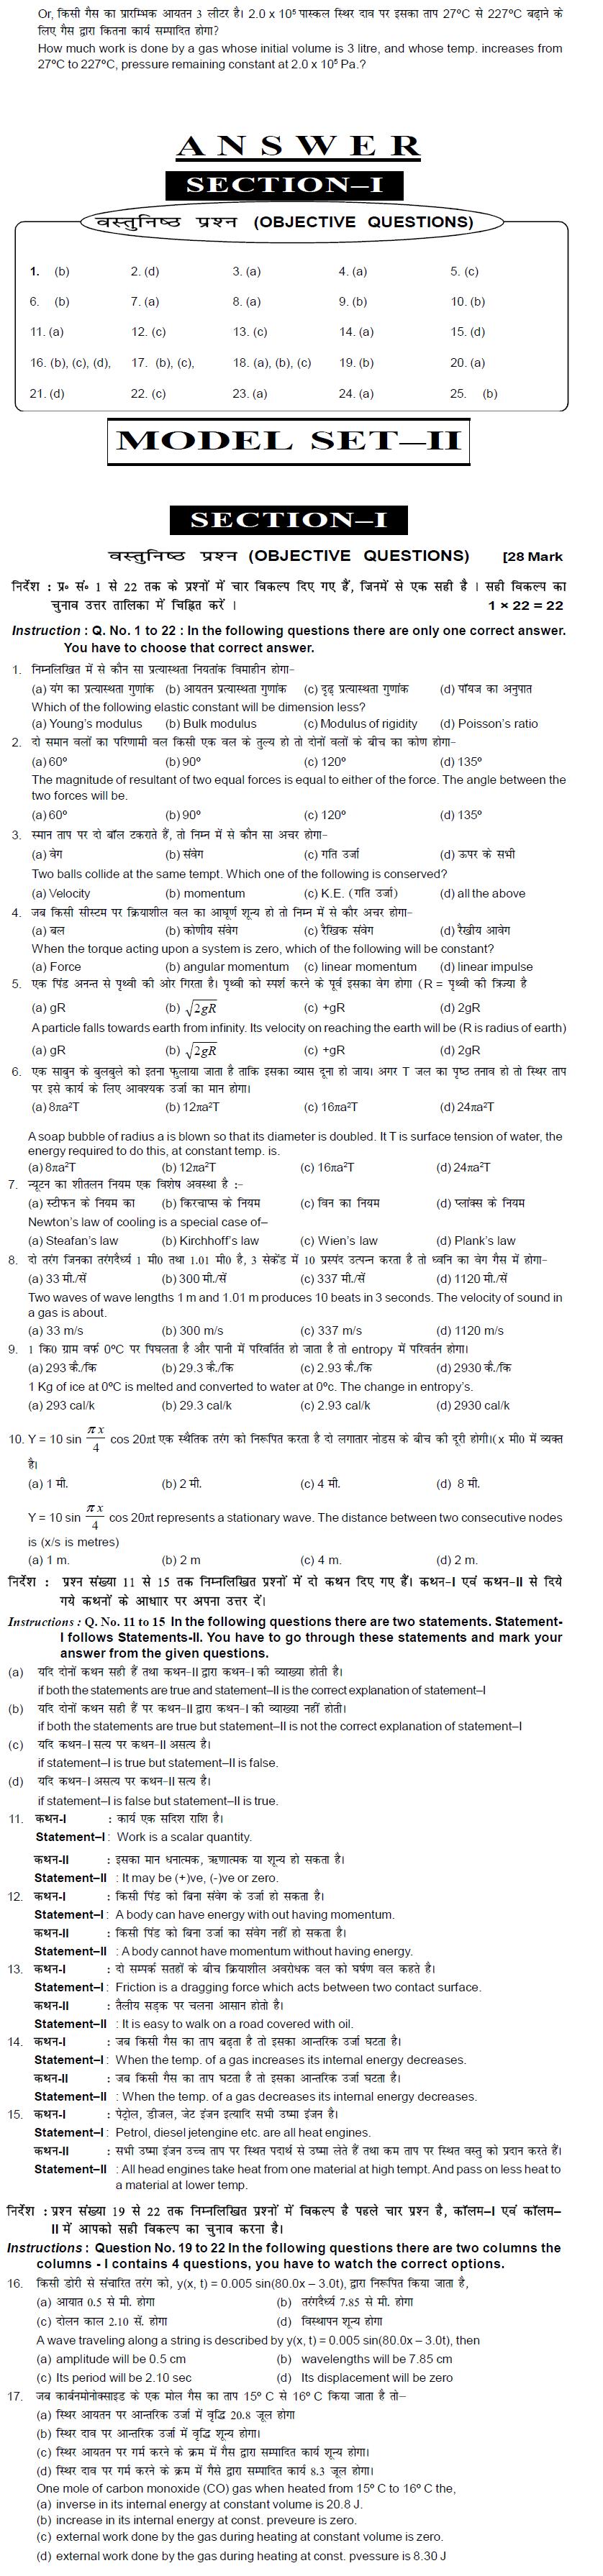 Bihar Board Class XI Science Model Question Papers - Physics